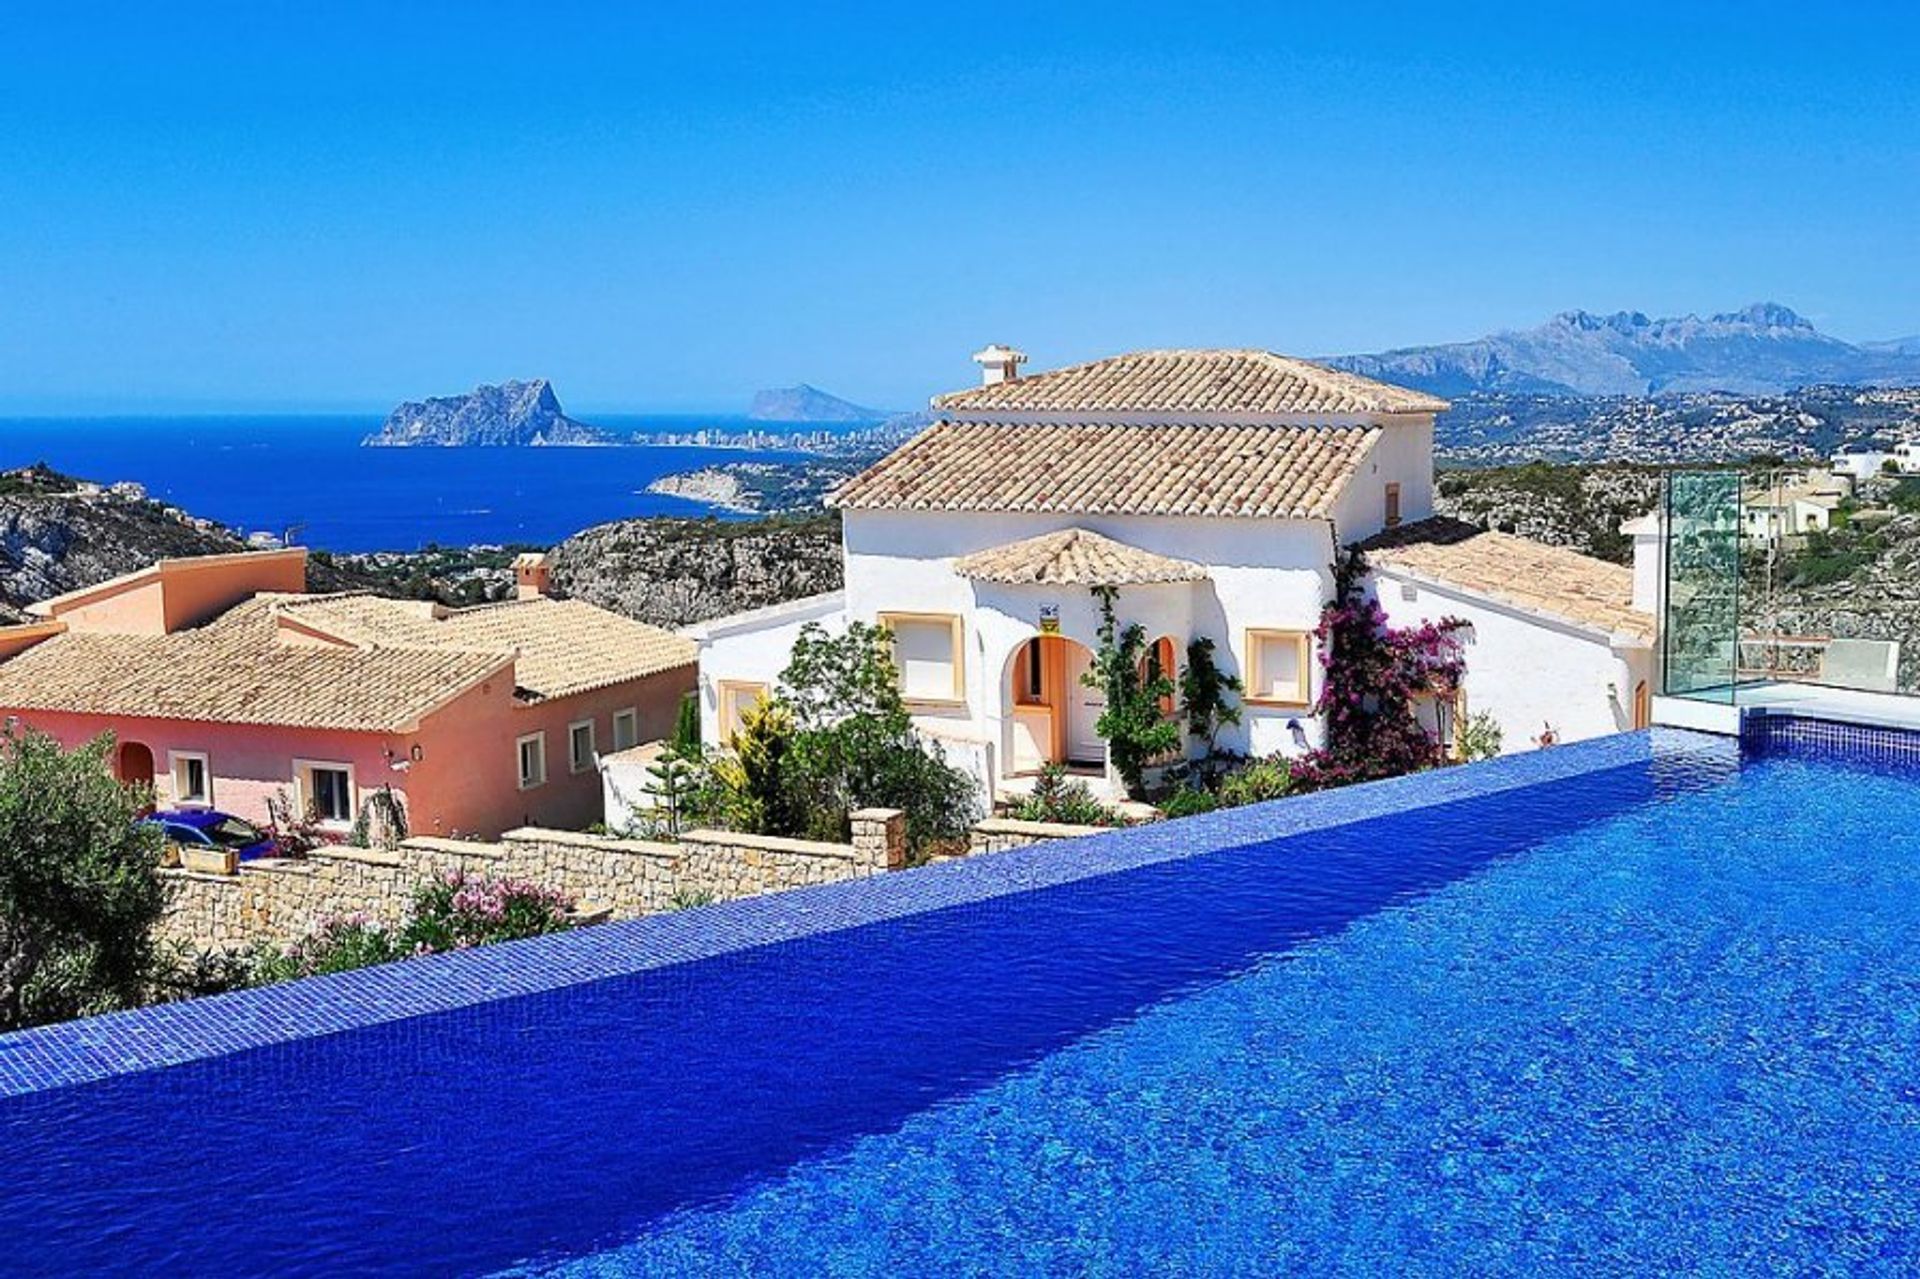 Stay in one of our villas and enjoy fantastic panoramic views of the Mediterranean from your own private pool